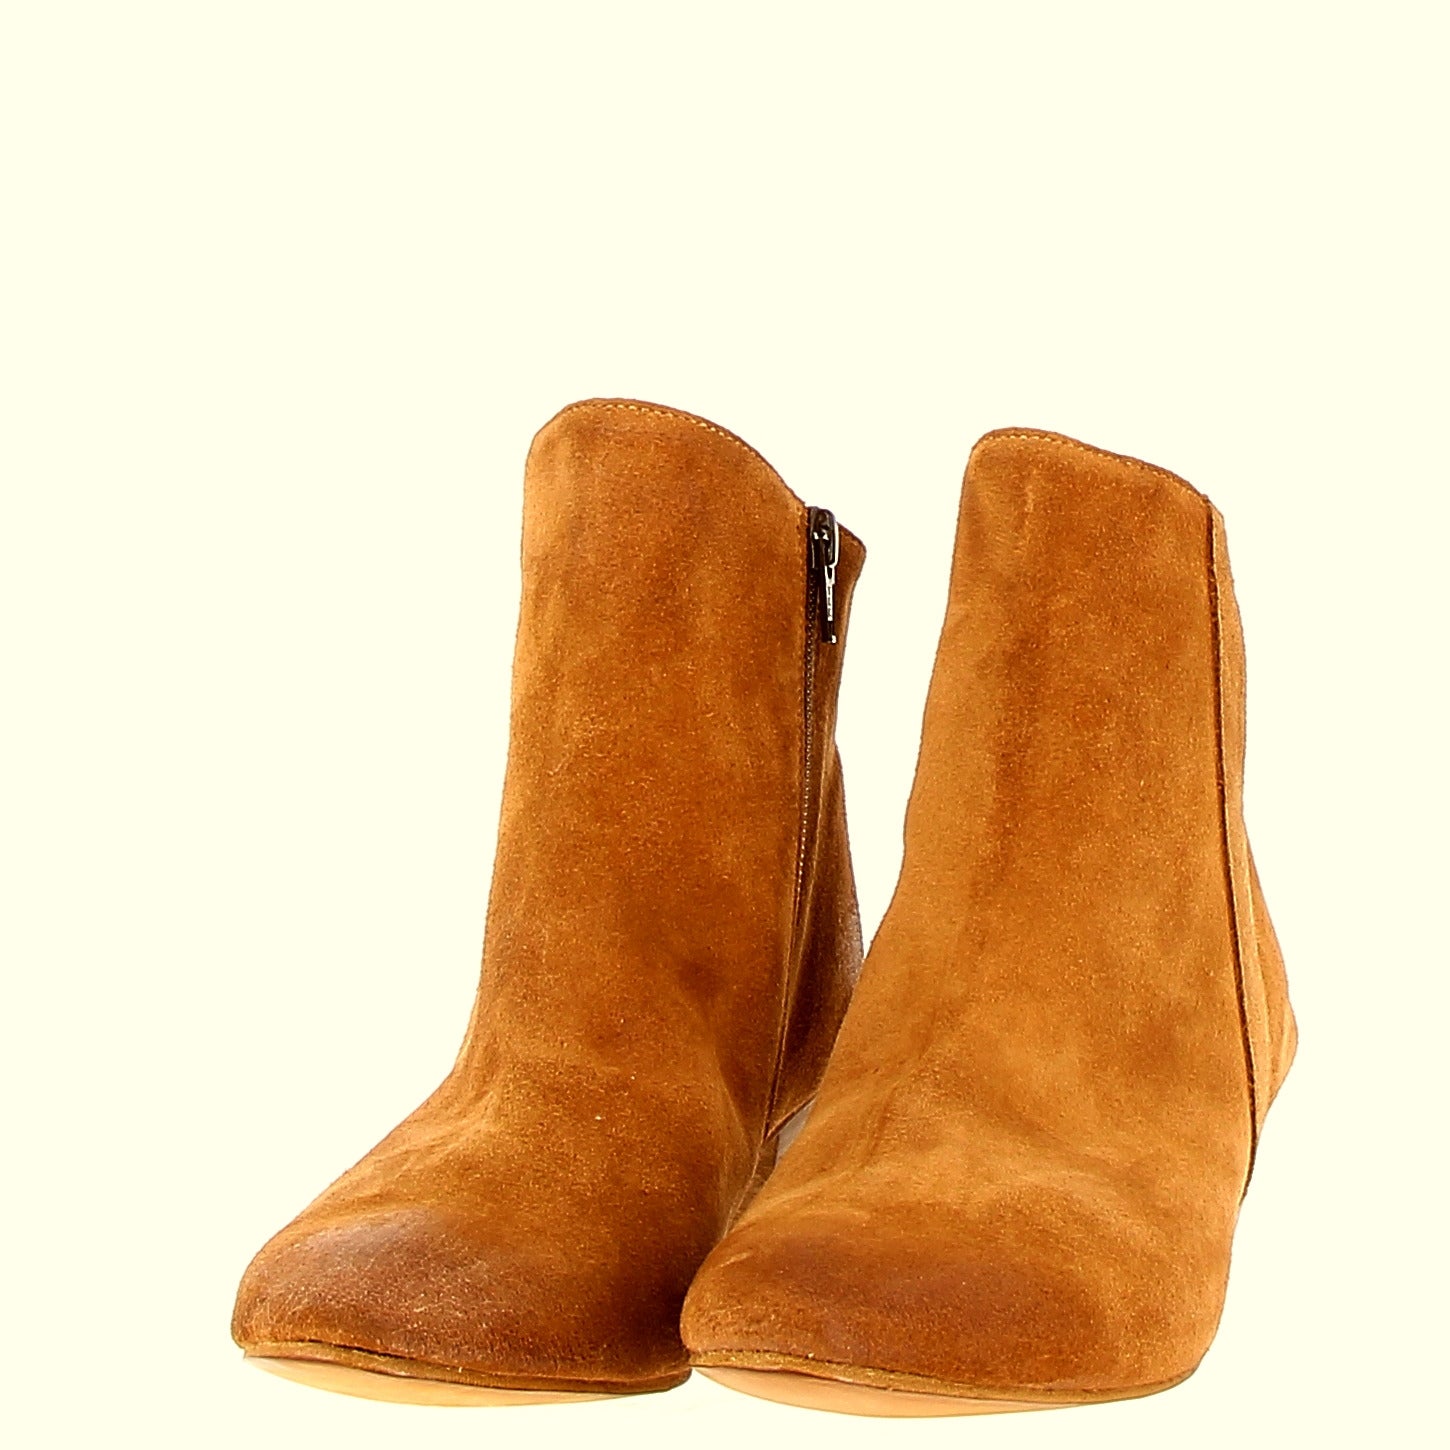 Cognac suede ankle boot